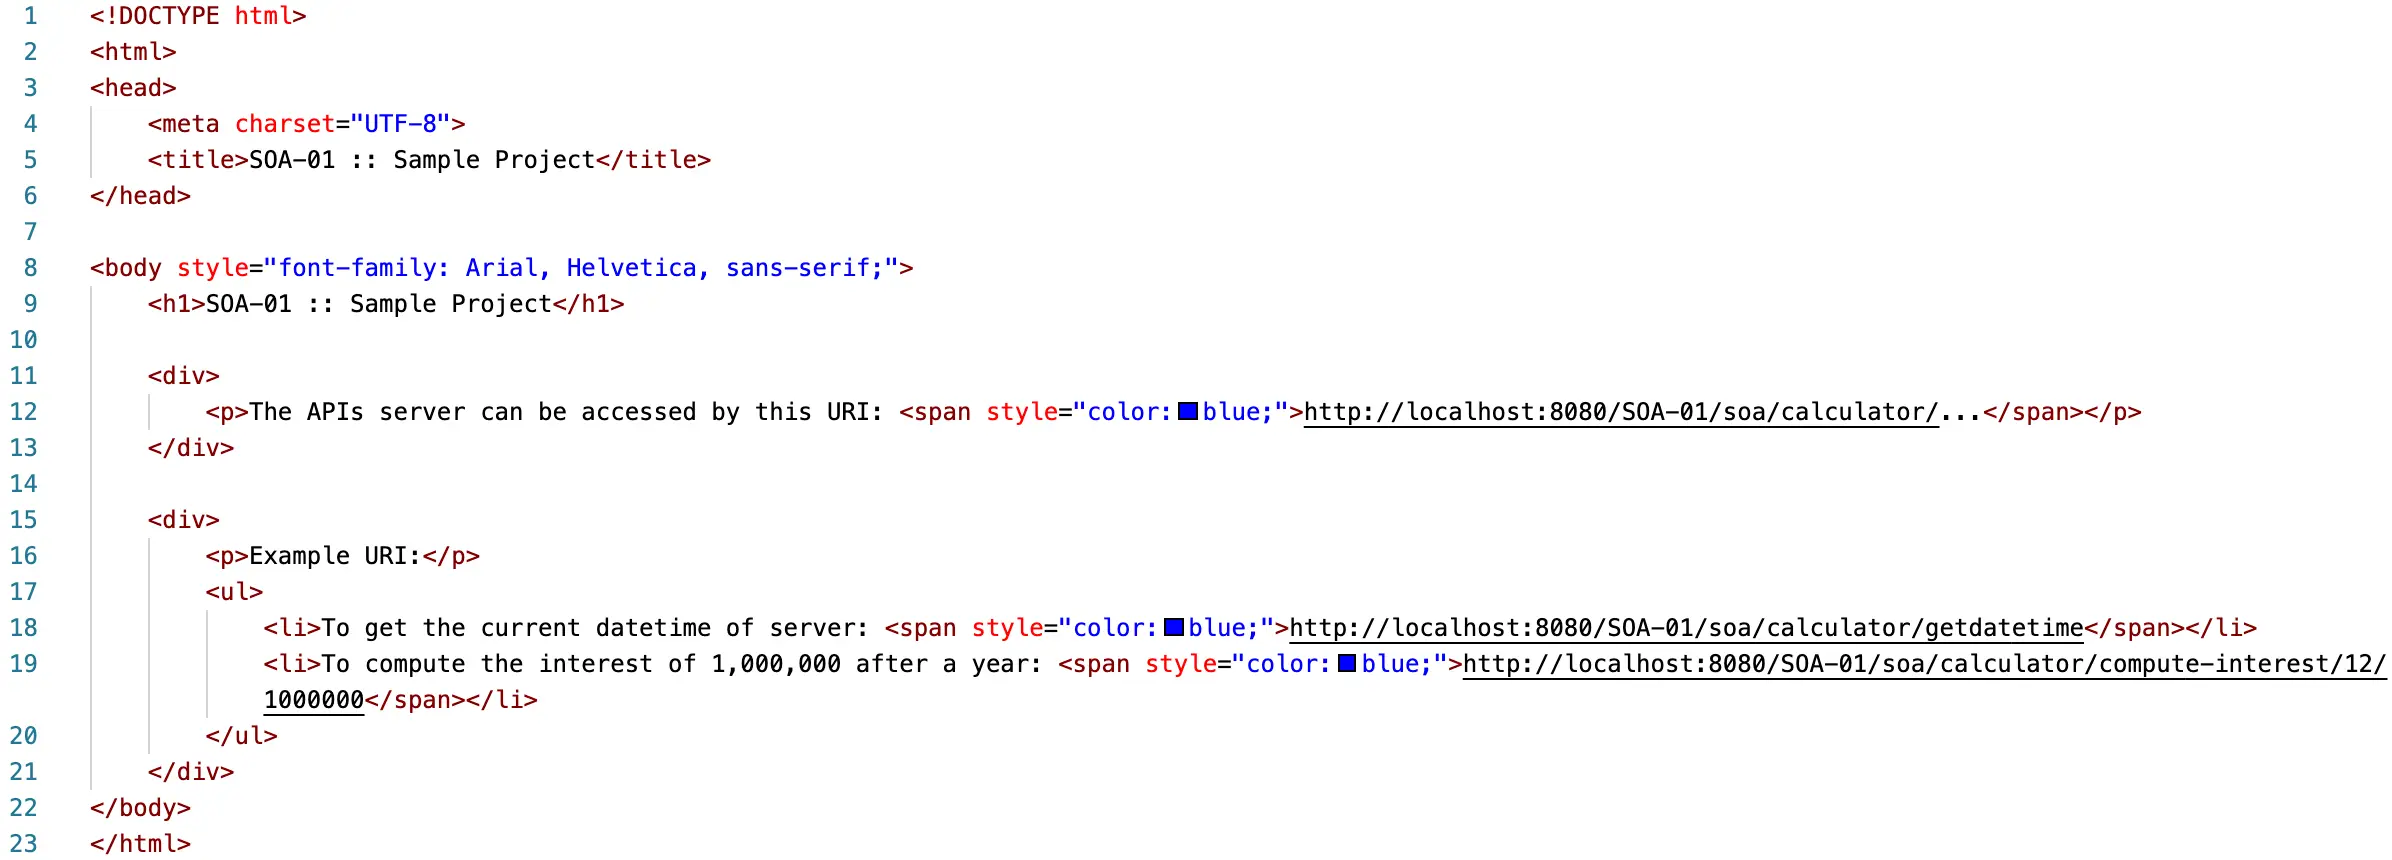 Fig 18. Sample content of index.html file.